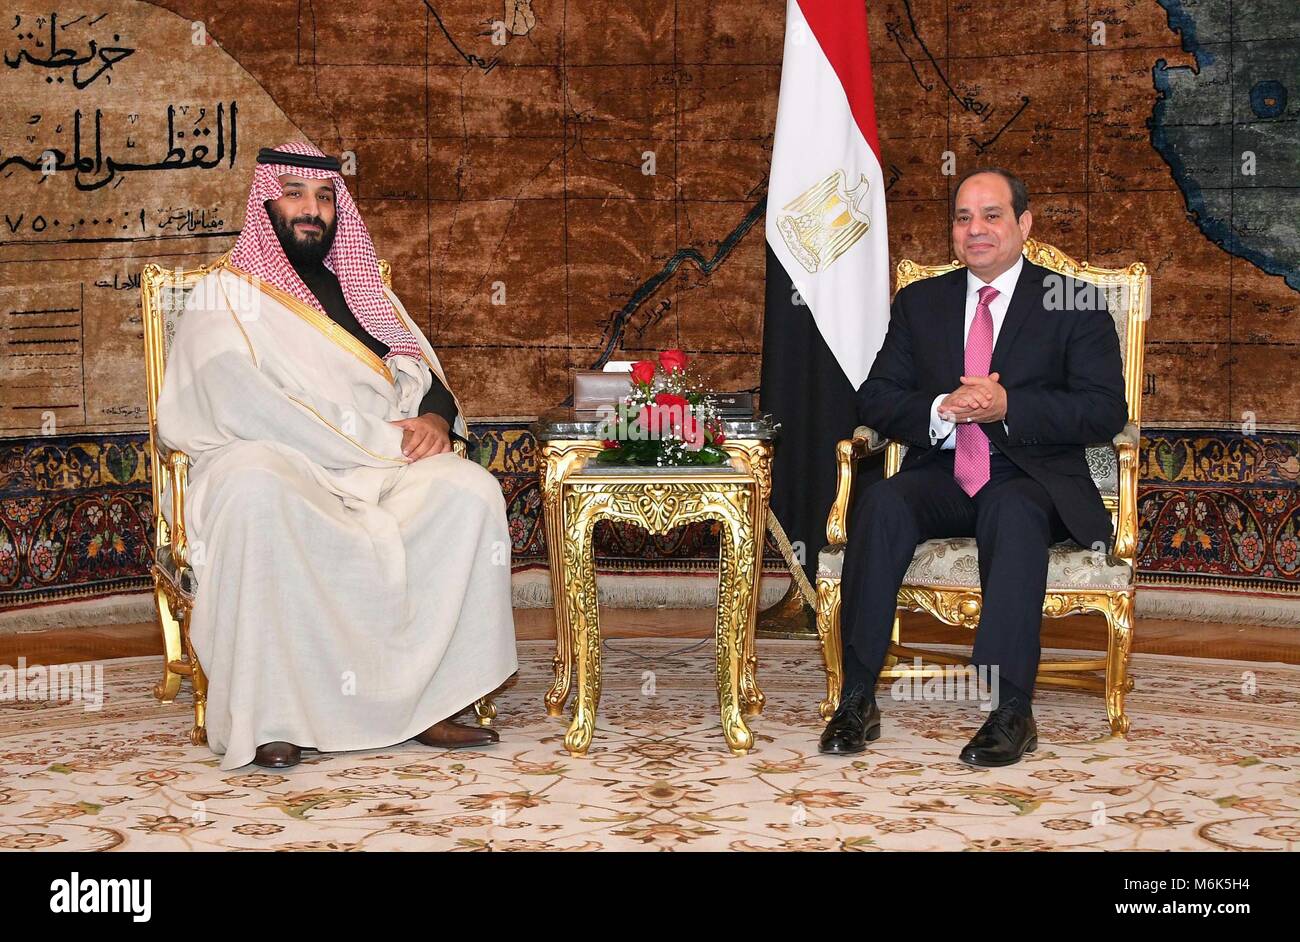 Cairo, Egypt. 4th Mar, 2018. Egyptian President Abdel-Fattah al-Sisi (R) meets with visiting Saudi Crown Prince Mohammed bin Salman in Cairo, capital of Egypt, on March 4, 2018. Egyptian President Abdel-Fattah al-Sisi reached a deal on Sunday with visiting Saudi Crown Prince Mohammed bin Salman on joint efforts to face divisive regional interventions. Credit: MENA/Xinhua/Alamy Live News Stock Photo